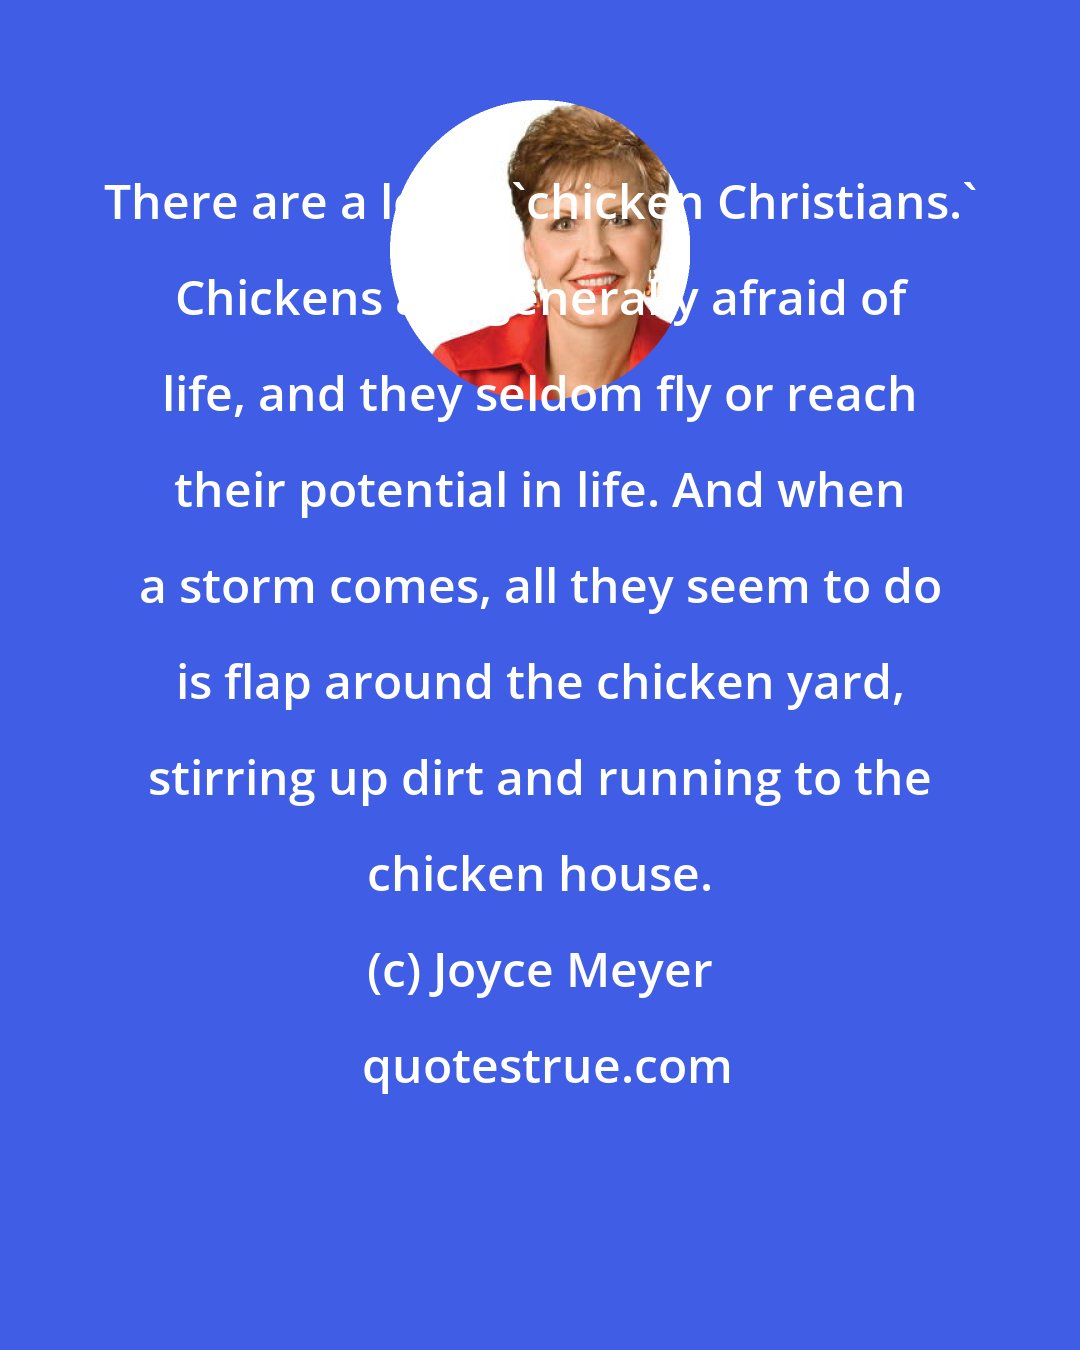 Joyce Meyer: There are a lot of 'chicken Christians.' Chickens are generally afraid of life, and they seldom fly or reach their potential in life. And when a storm comes, all they seem to do is flap around the chicken yard, stirring up dirt and running to the chicken house.